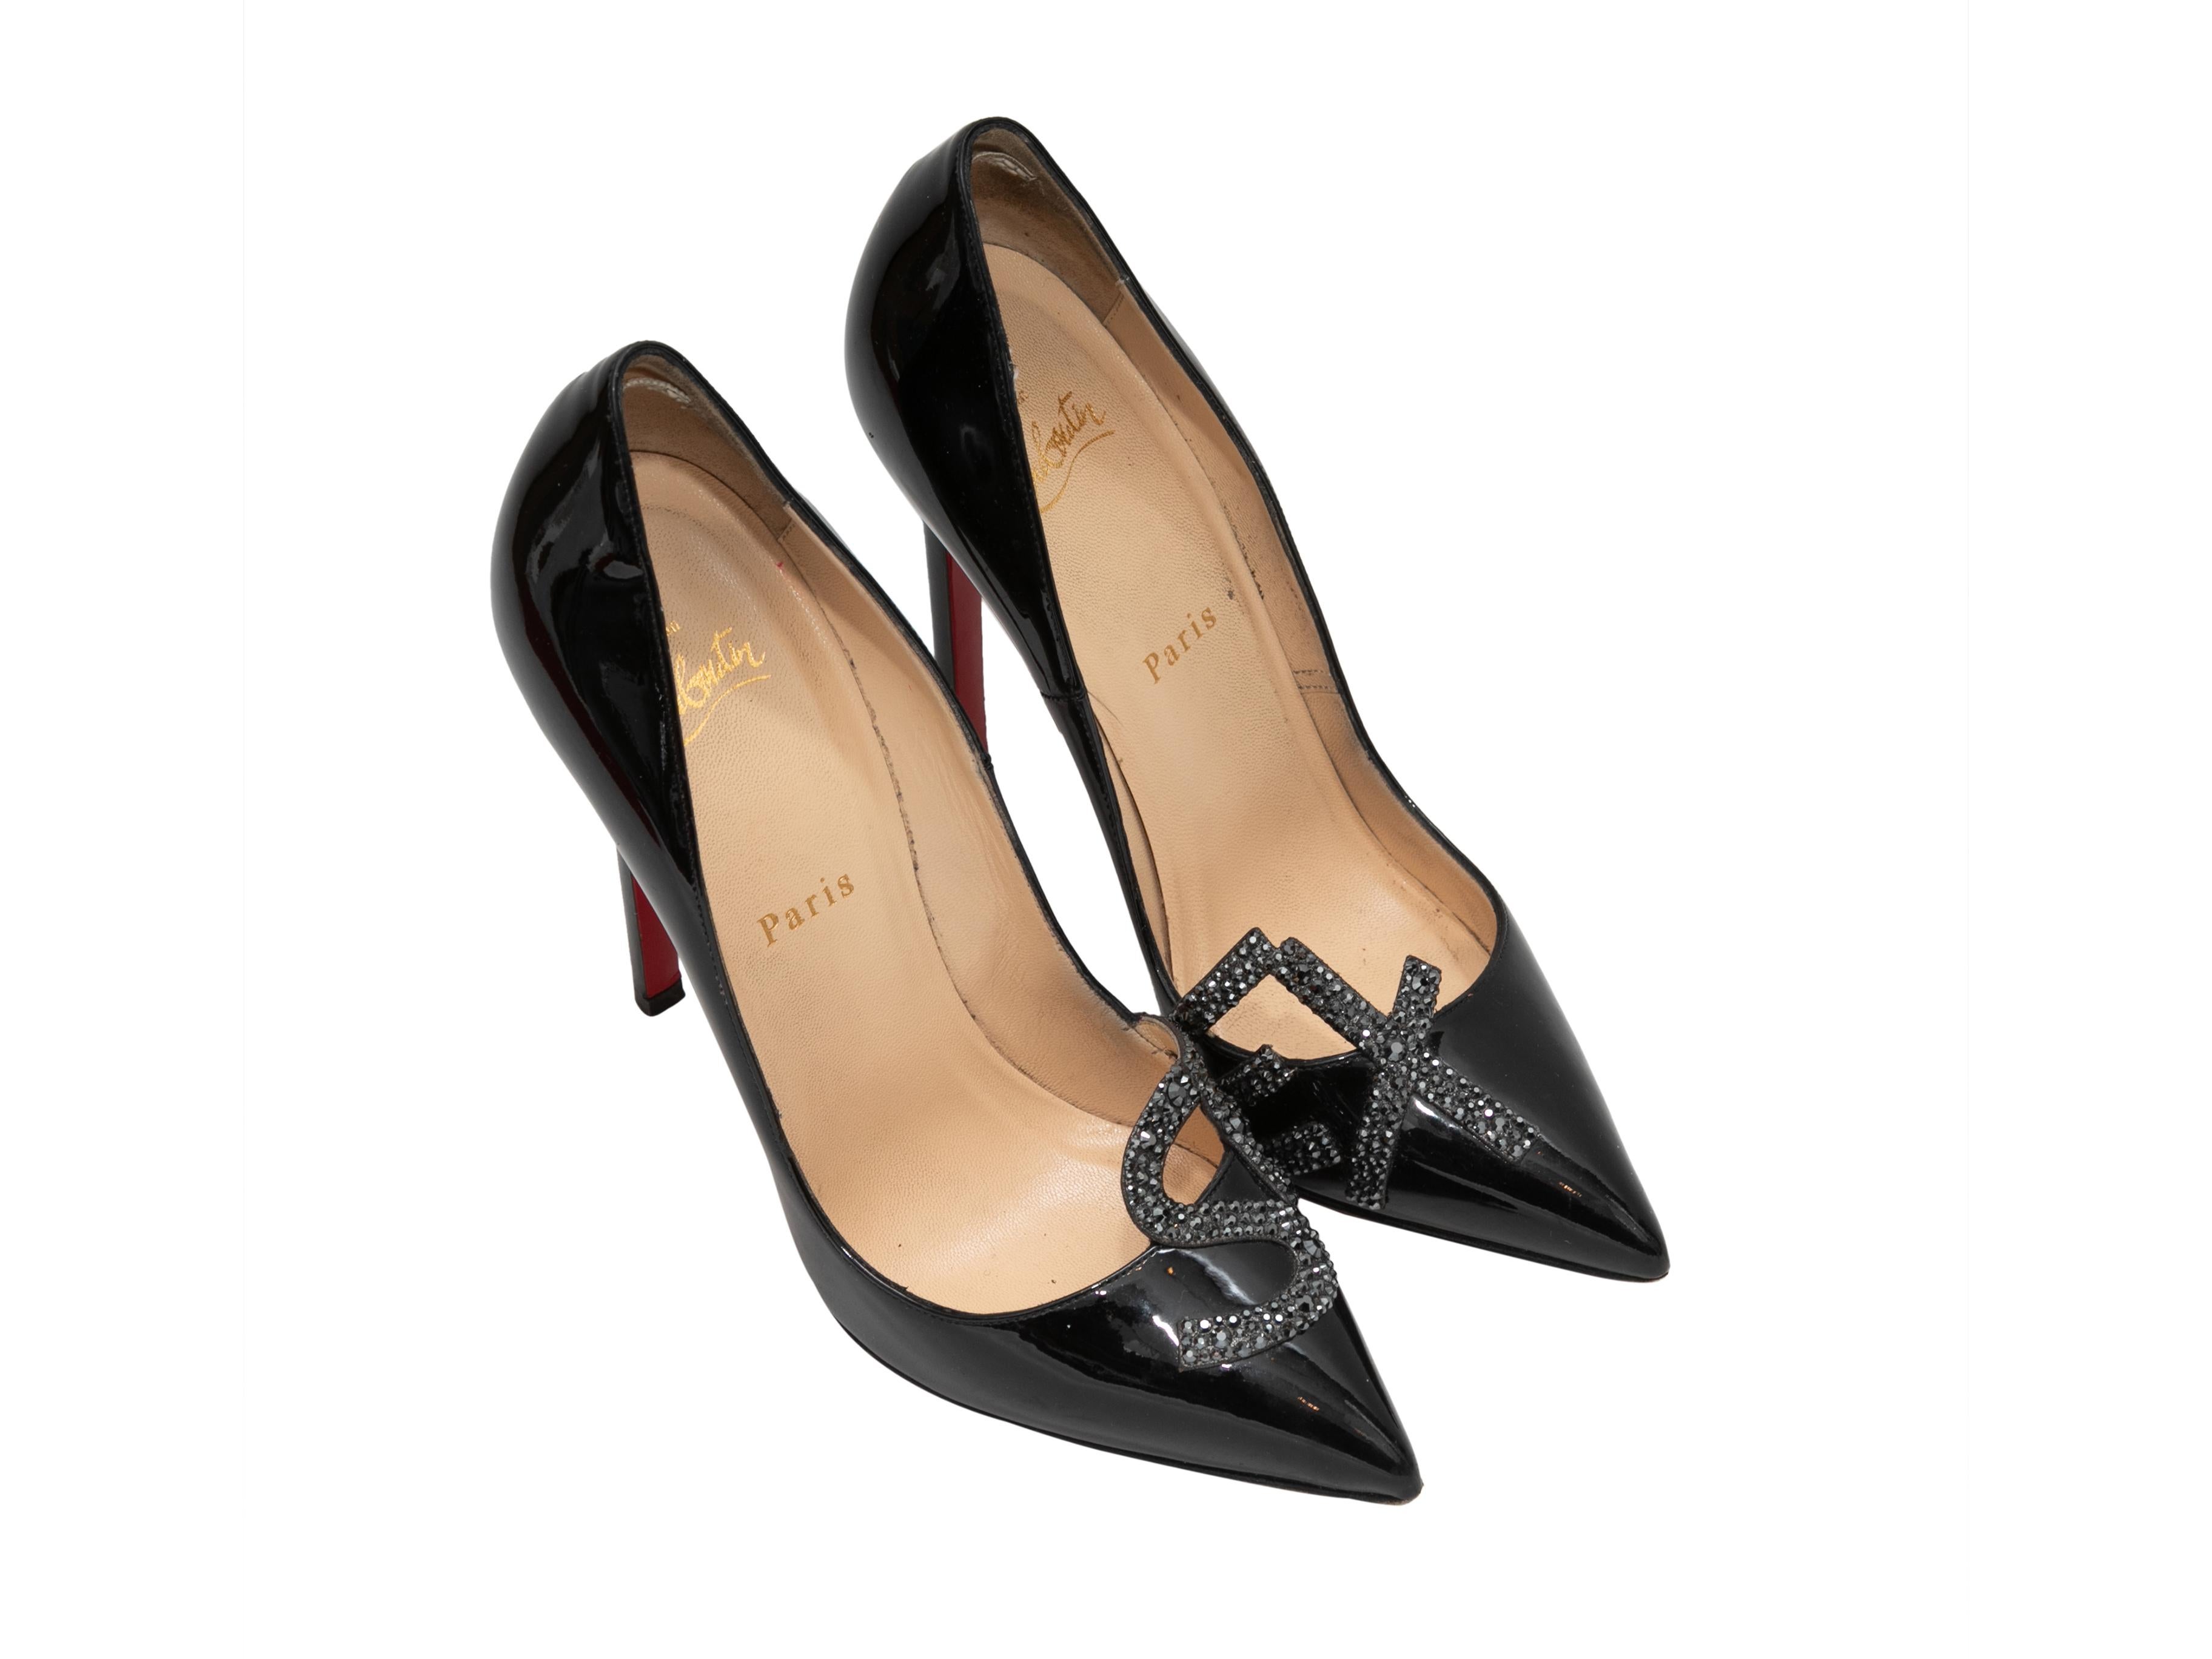 Black pointed-toe patent leather Sex pumps by Christian Louboutin. 4.5